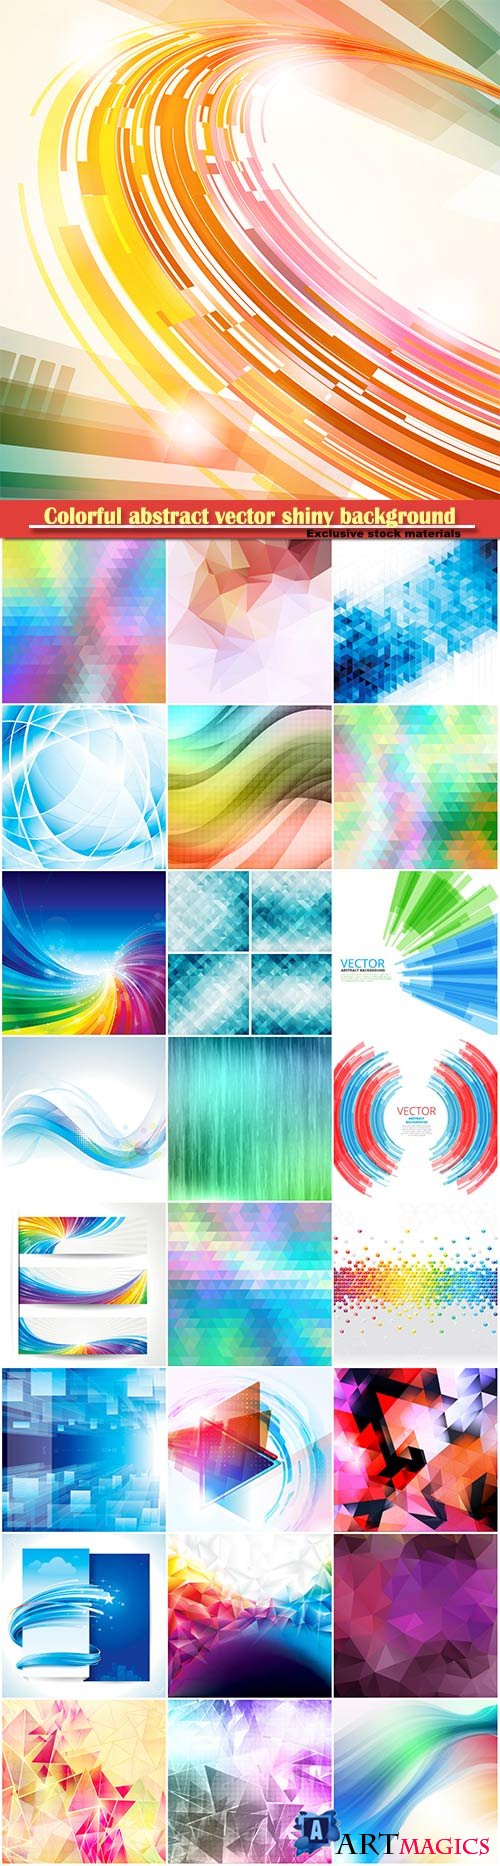 Colorful abstract vector shiny background